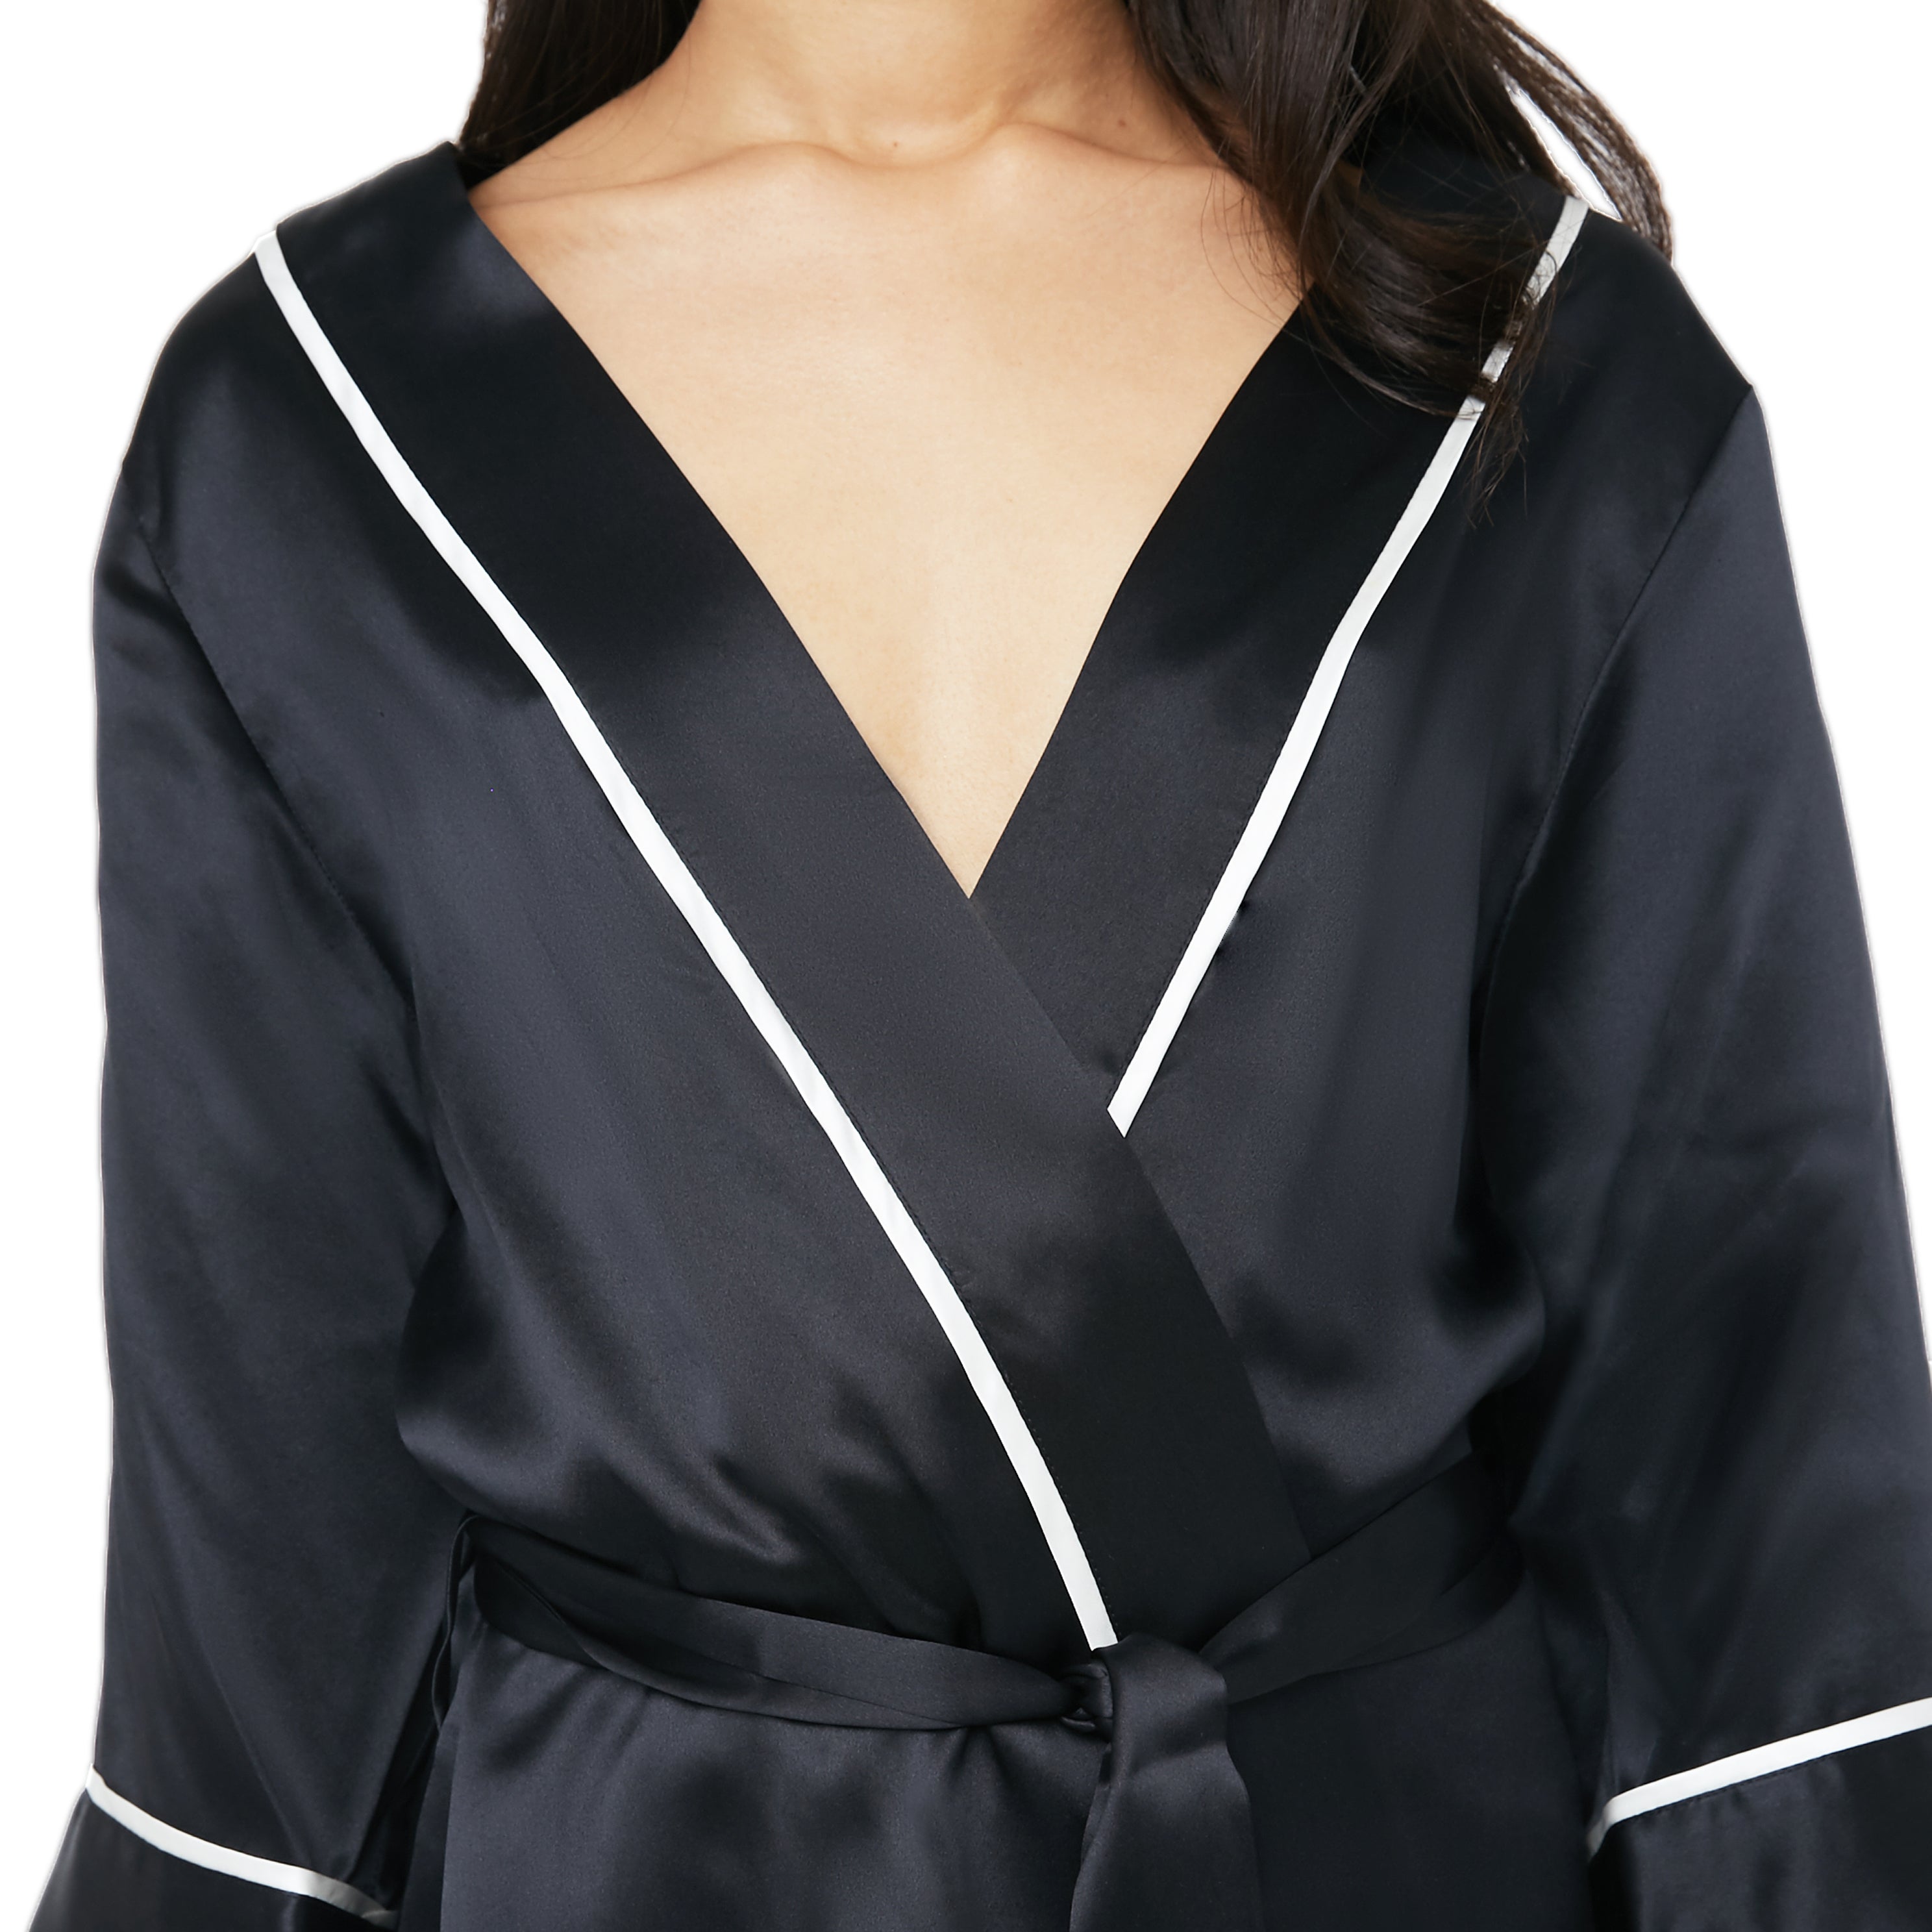 Classic Silk Robe with Contrast Piping - MYK Silk #style_kimono style #color_midnight black